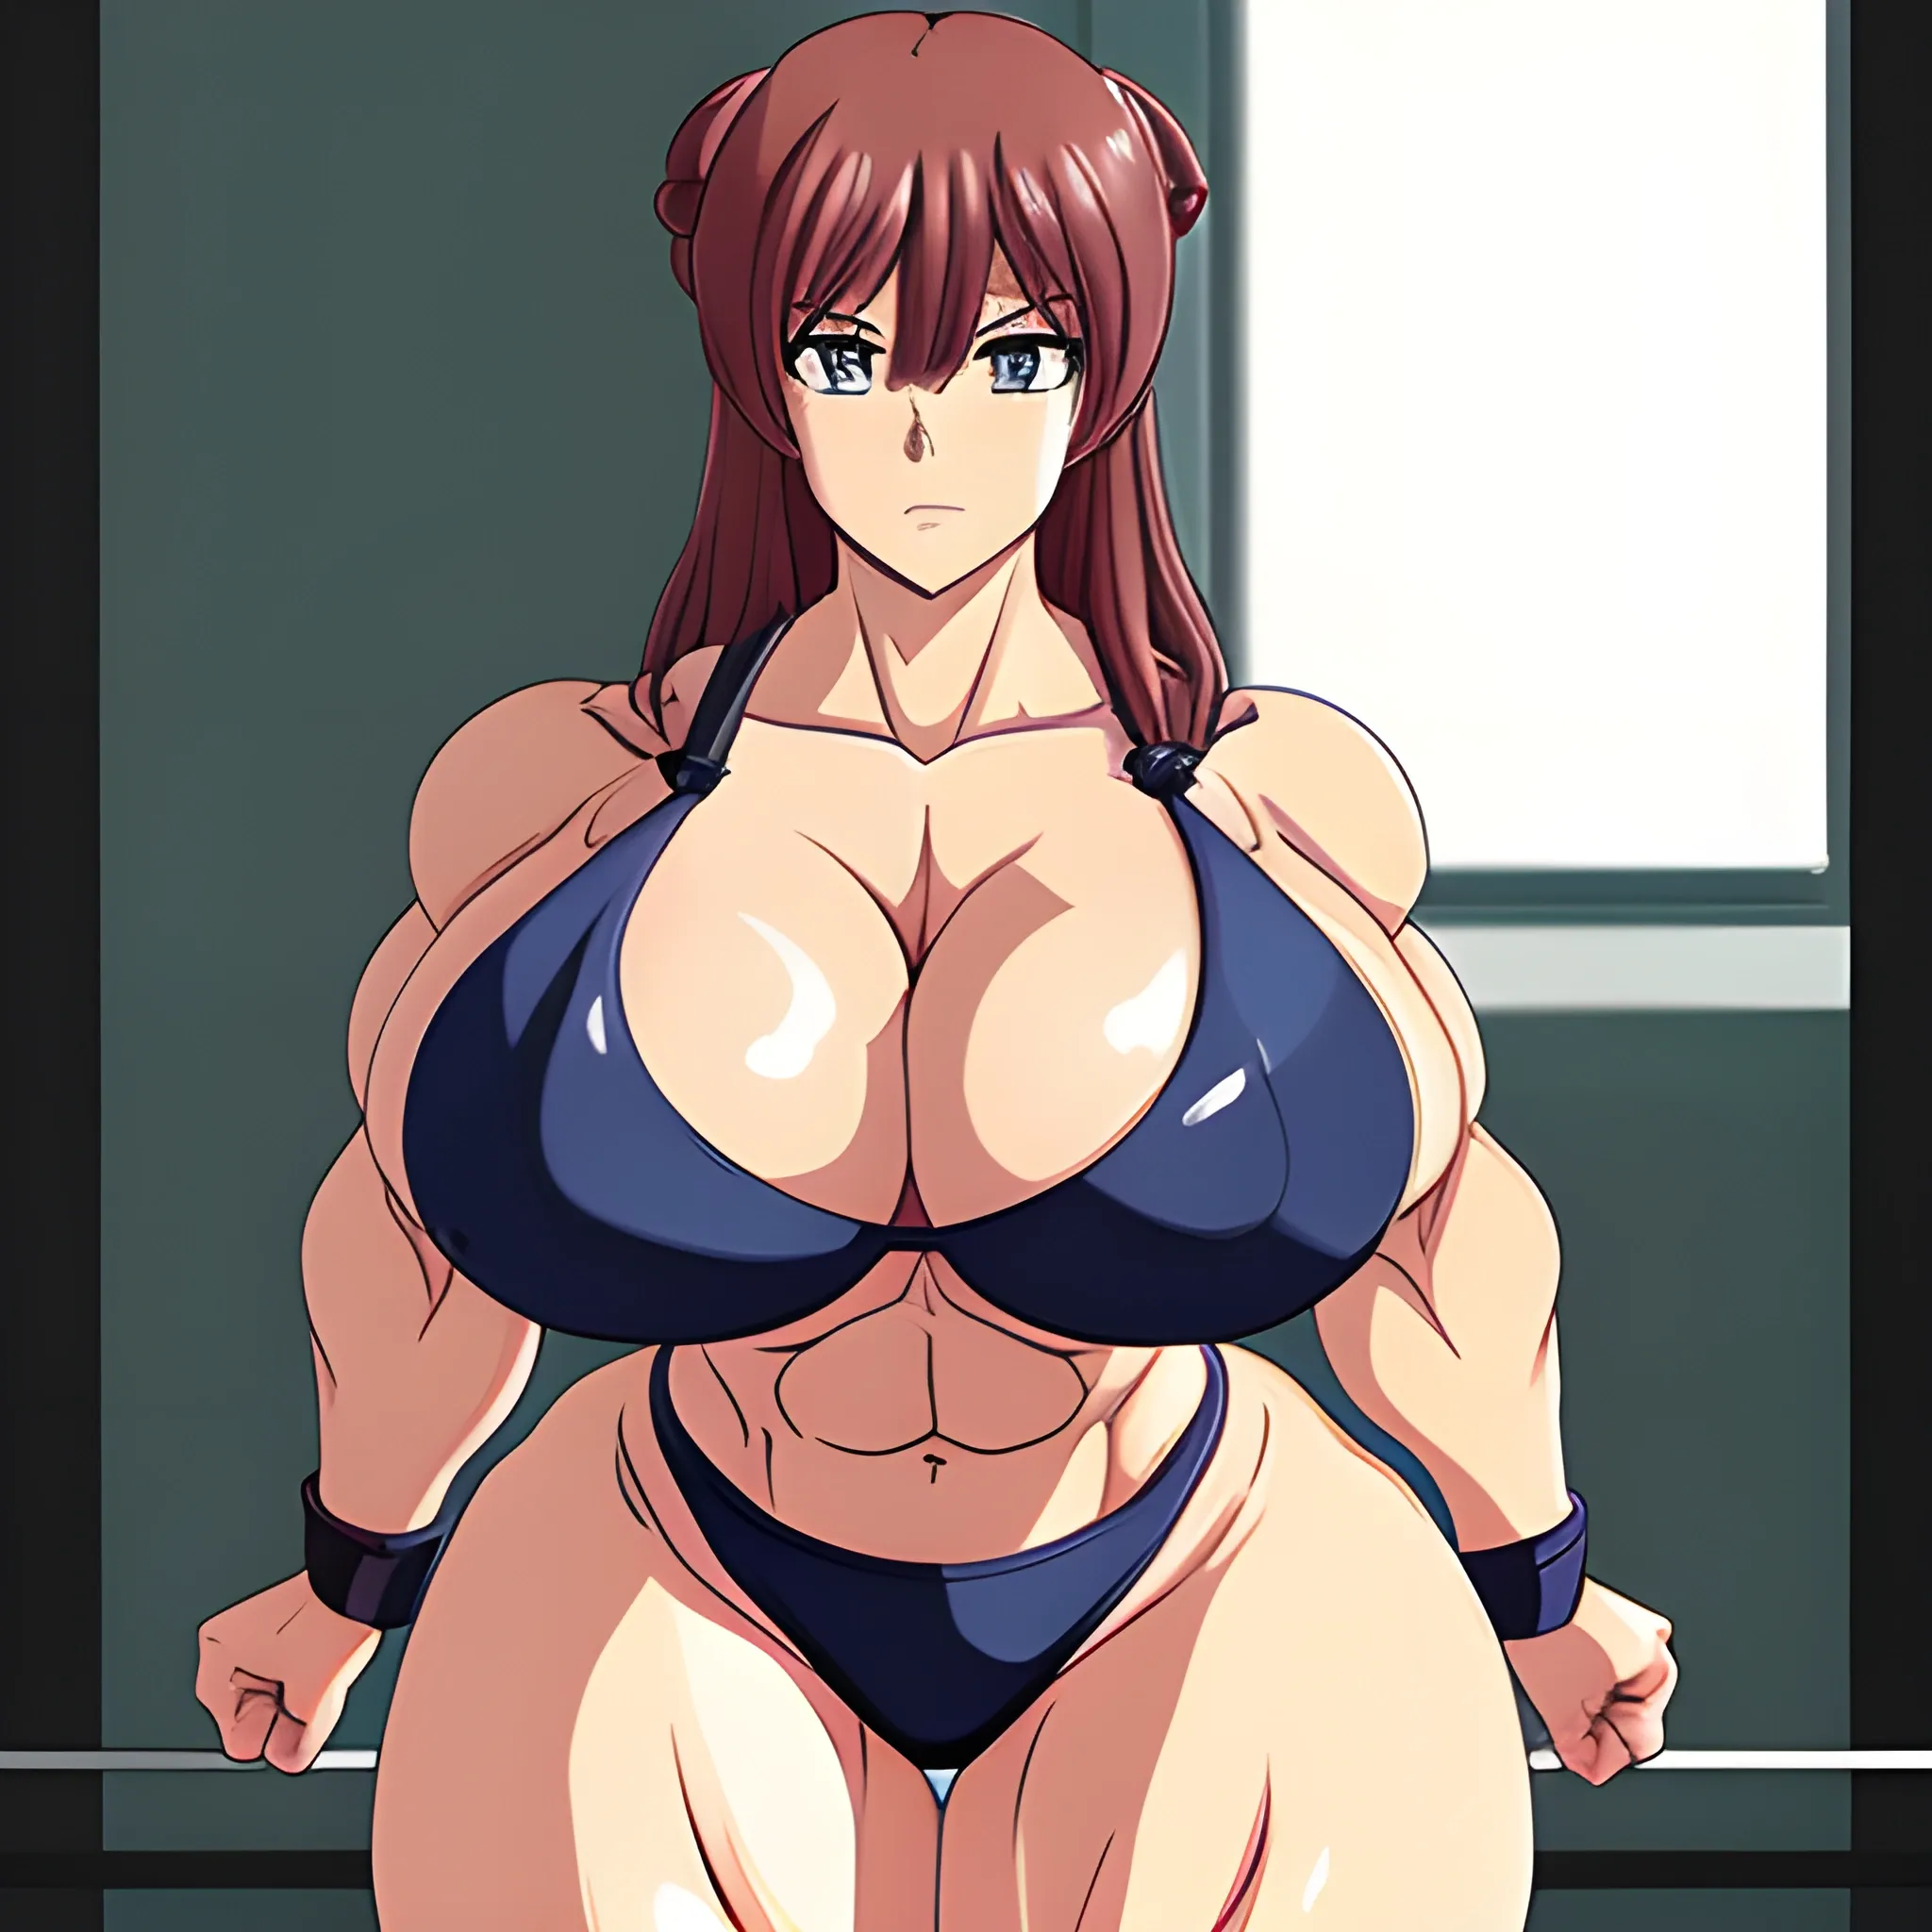 anime woman with muscles and big boobs wearing